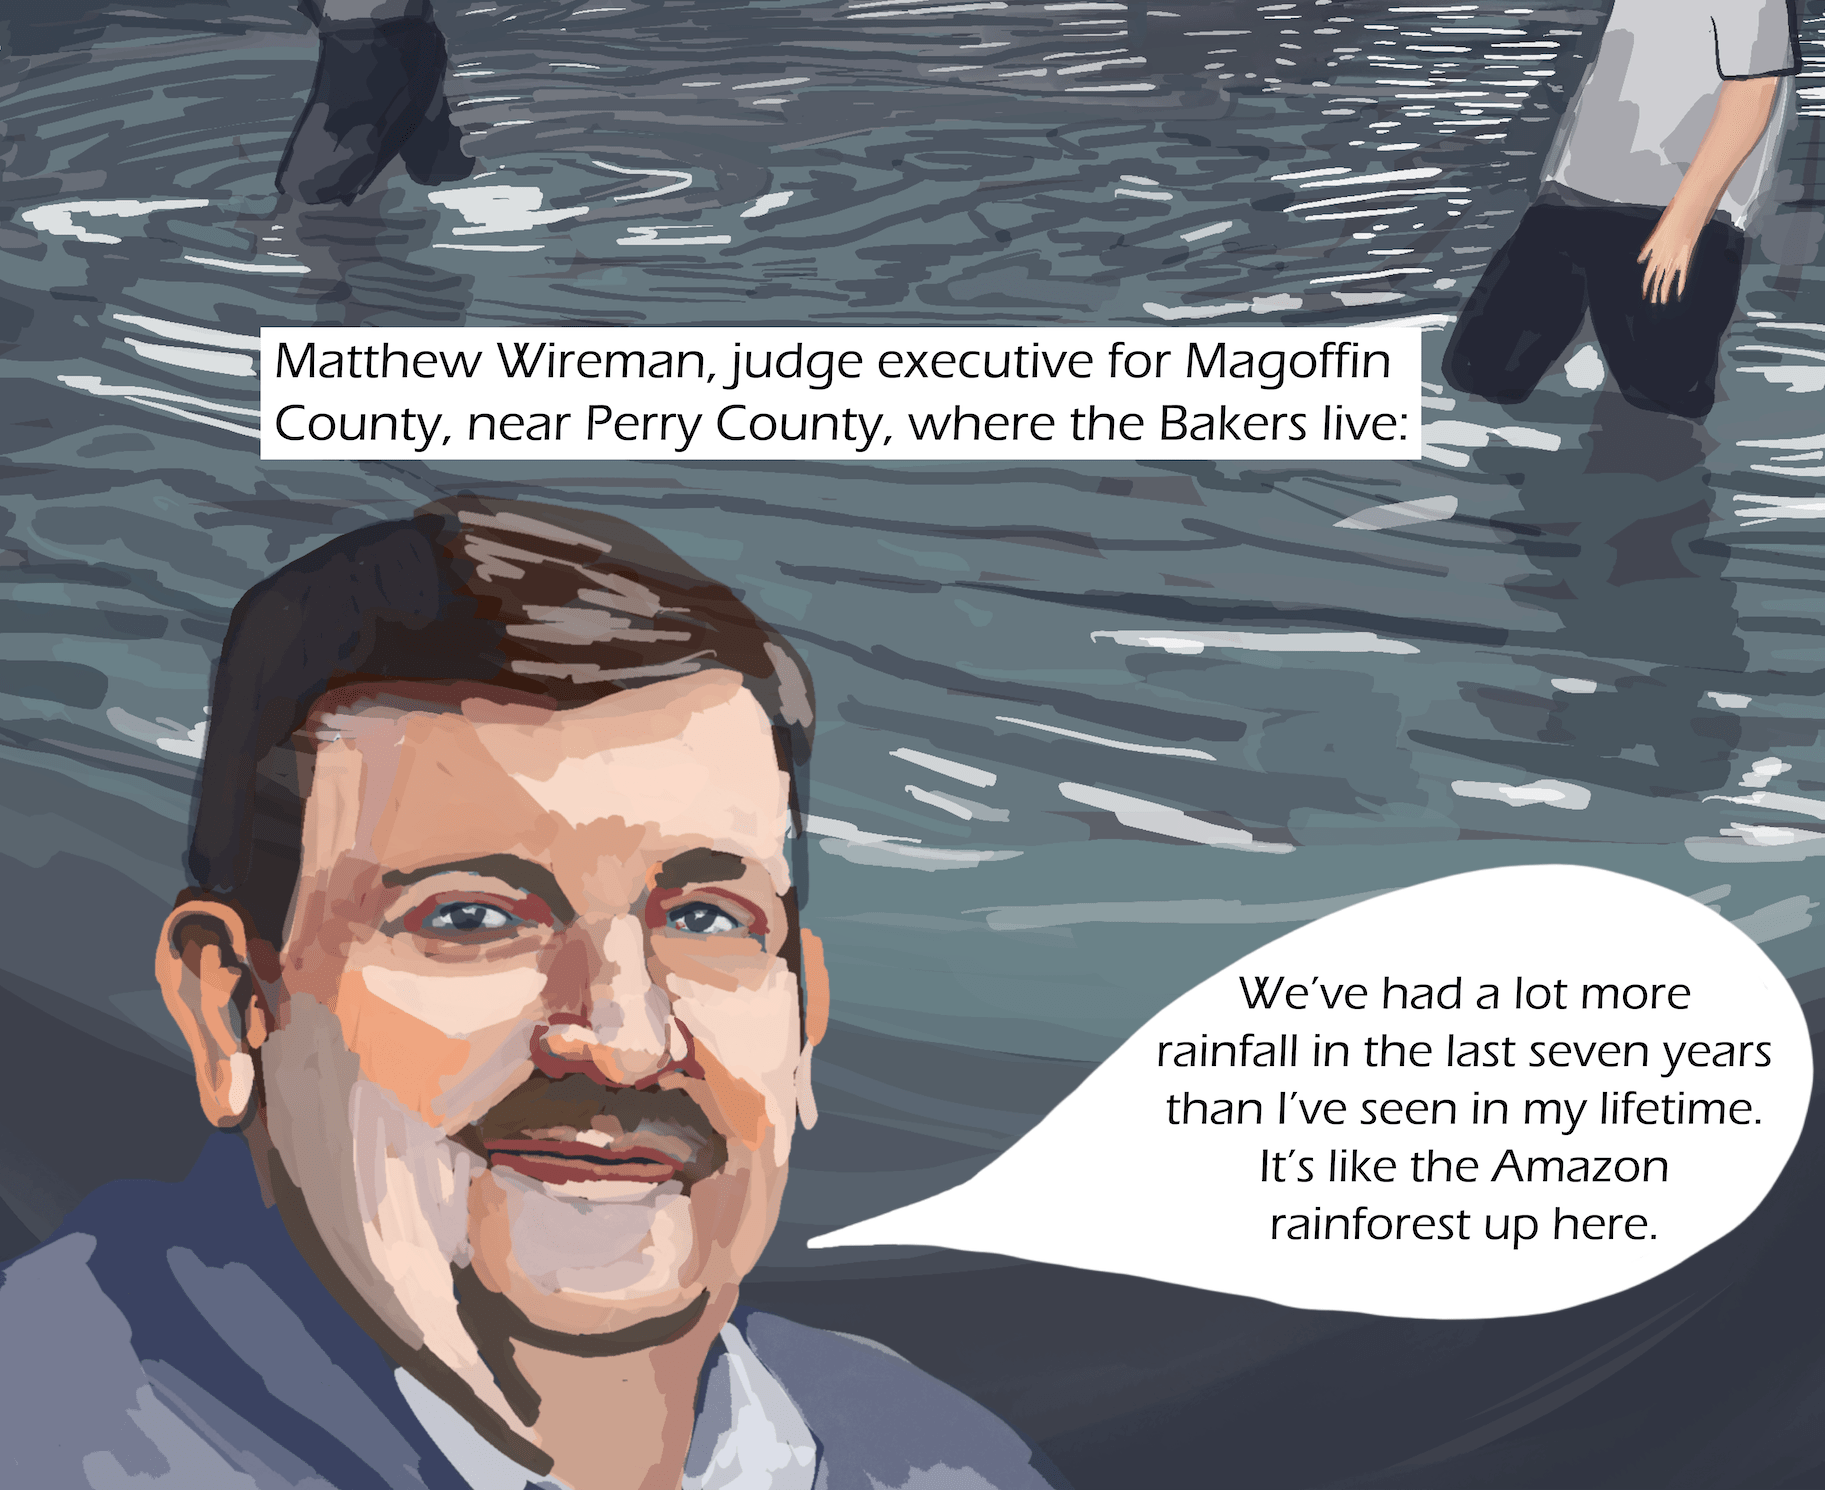 A man with a moustache speaks -- background is a flooded street with people walking across. Text: Matthew Wireman, judge executive for Magoffin County, near Perry County, where the Bakers live: “We’ve had a lot more rainfall in the last seven years than I’ve seen in my lifetime. It’s like the Amazon rainforest up here.”